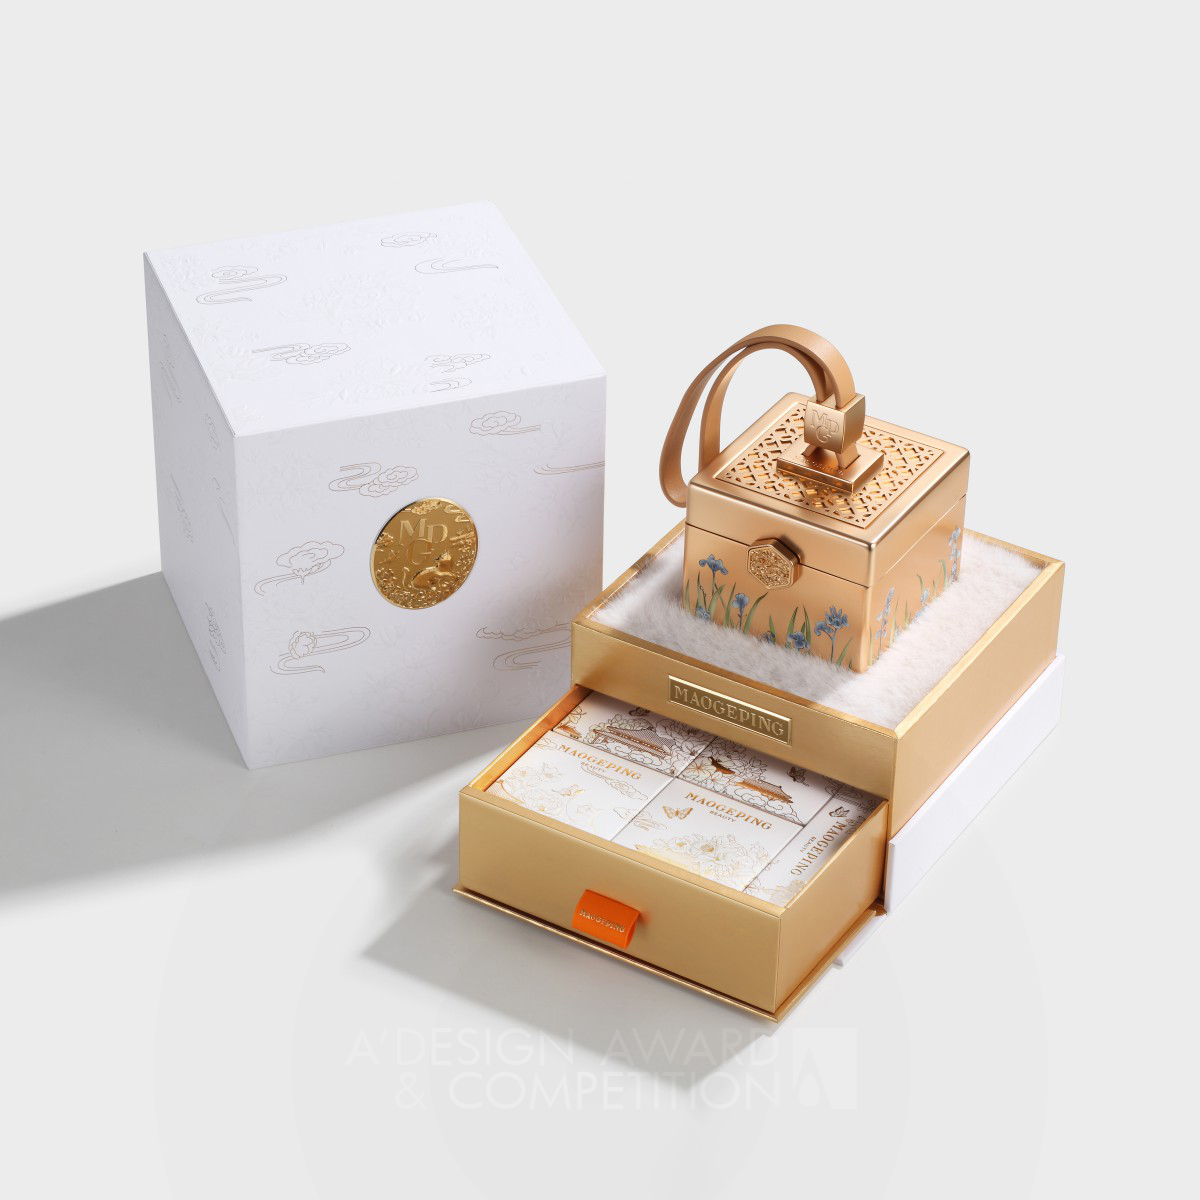 Hangzhou Maogeping Technology Co., Ltd wins Silver at the prestigious A' Packaging Design Award with Blooming Flowers Seeking Collection Gift Box.